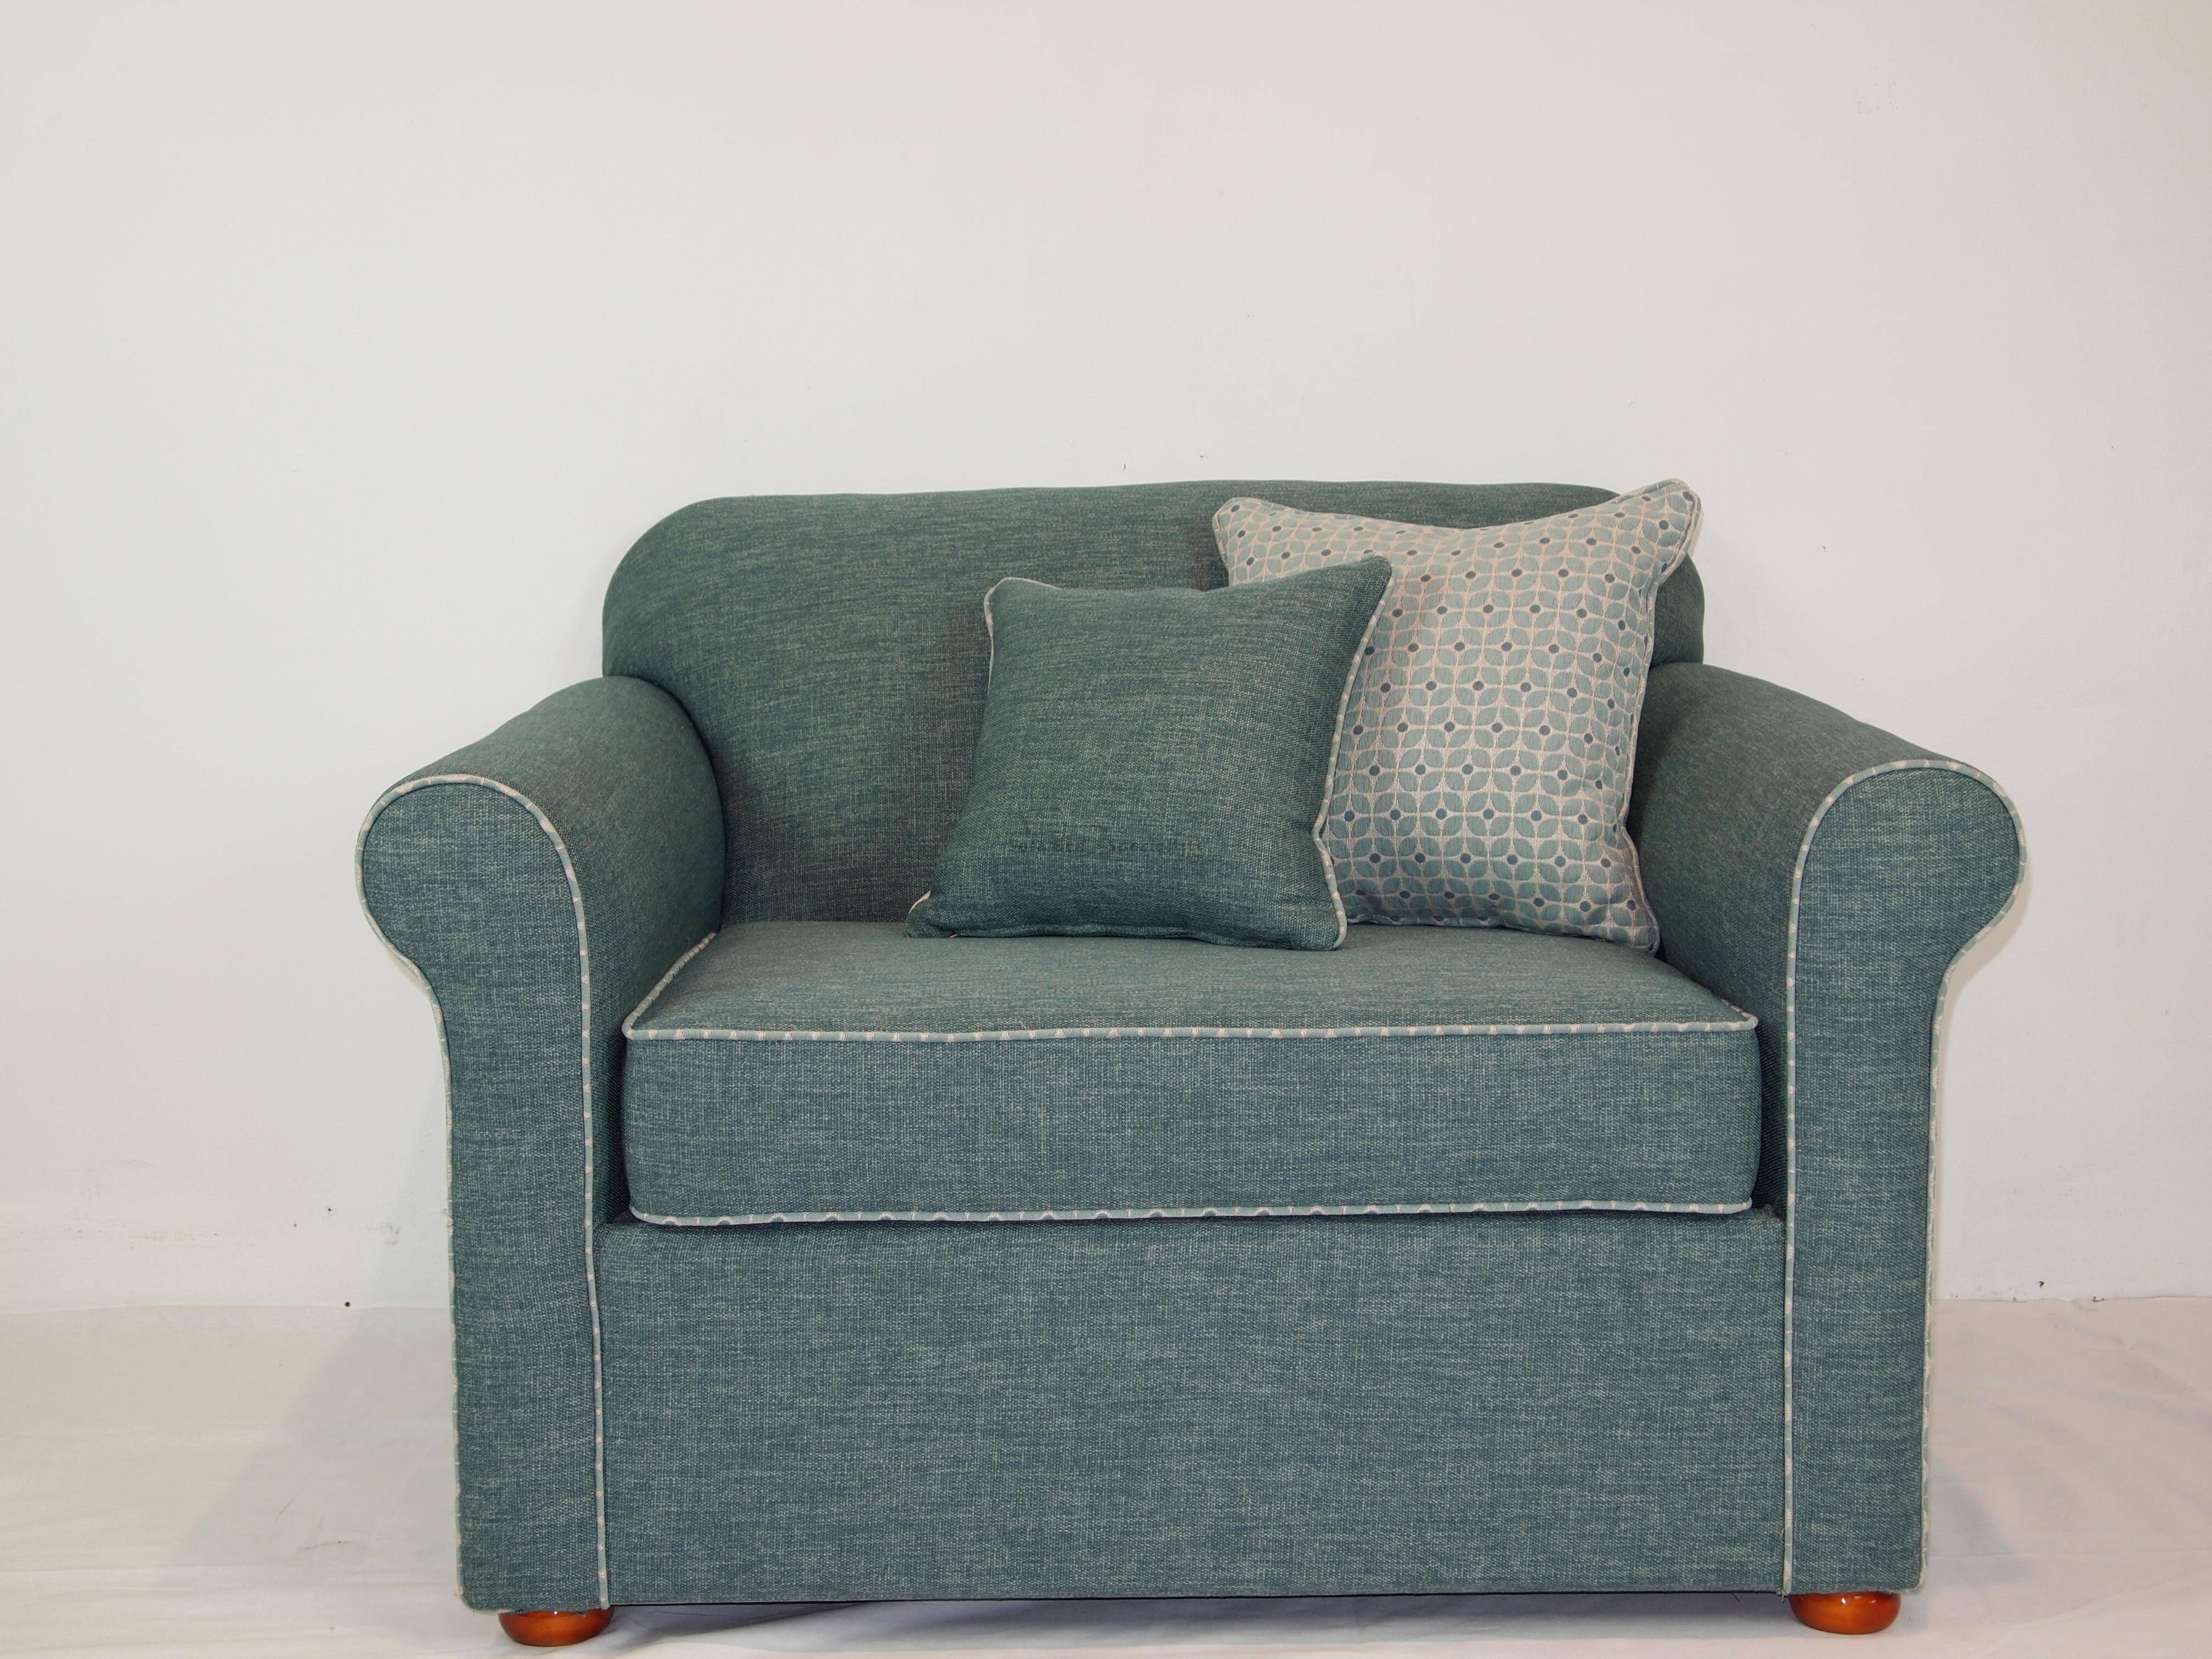 New Used Sofa Single Chair for Small Space